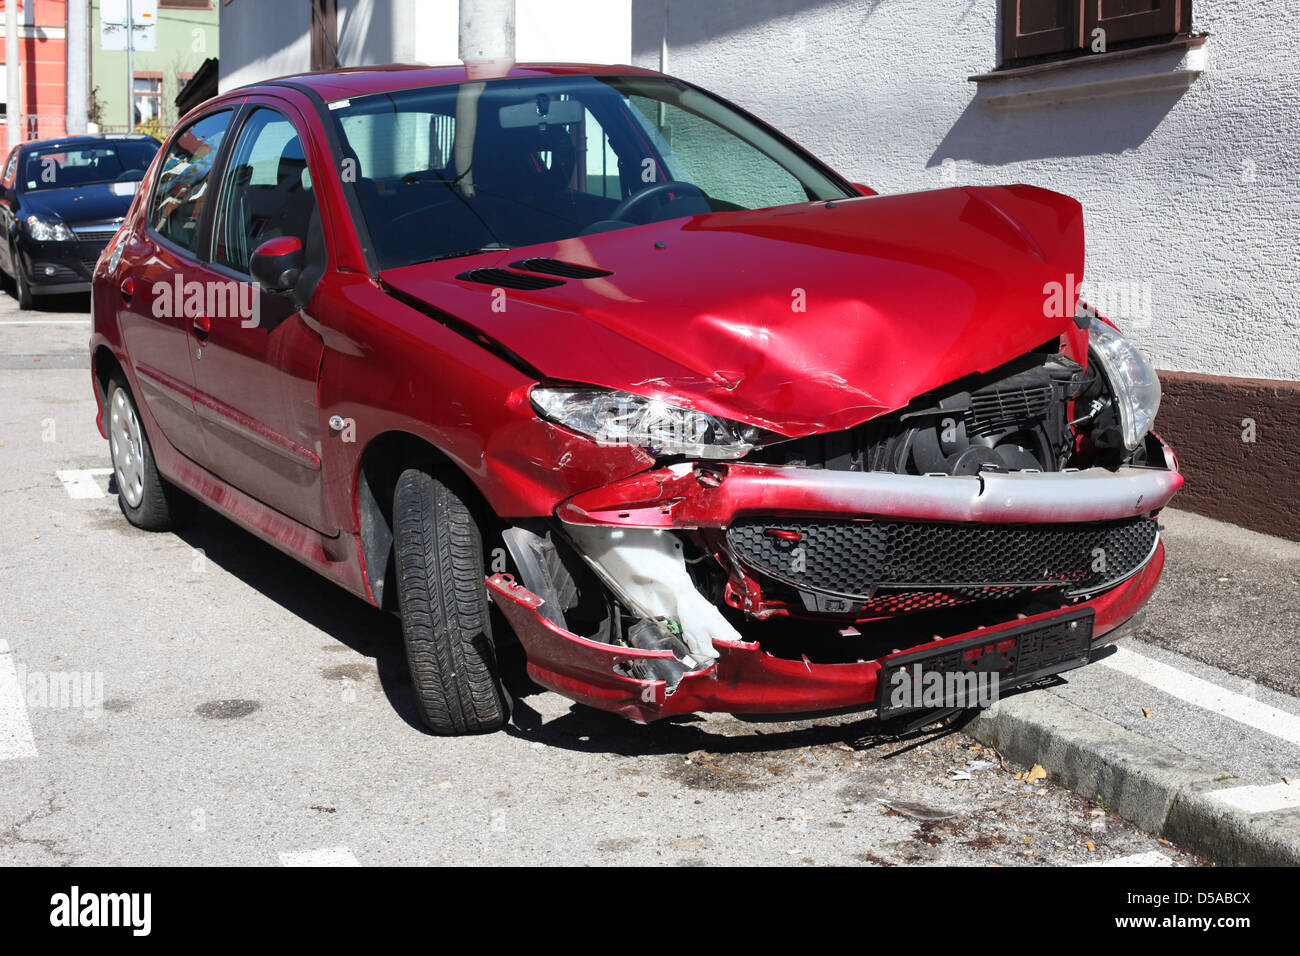 Wrecked red car on the street pavement Stock Photo